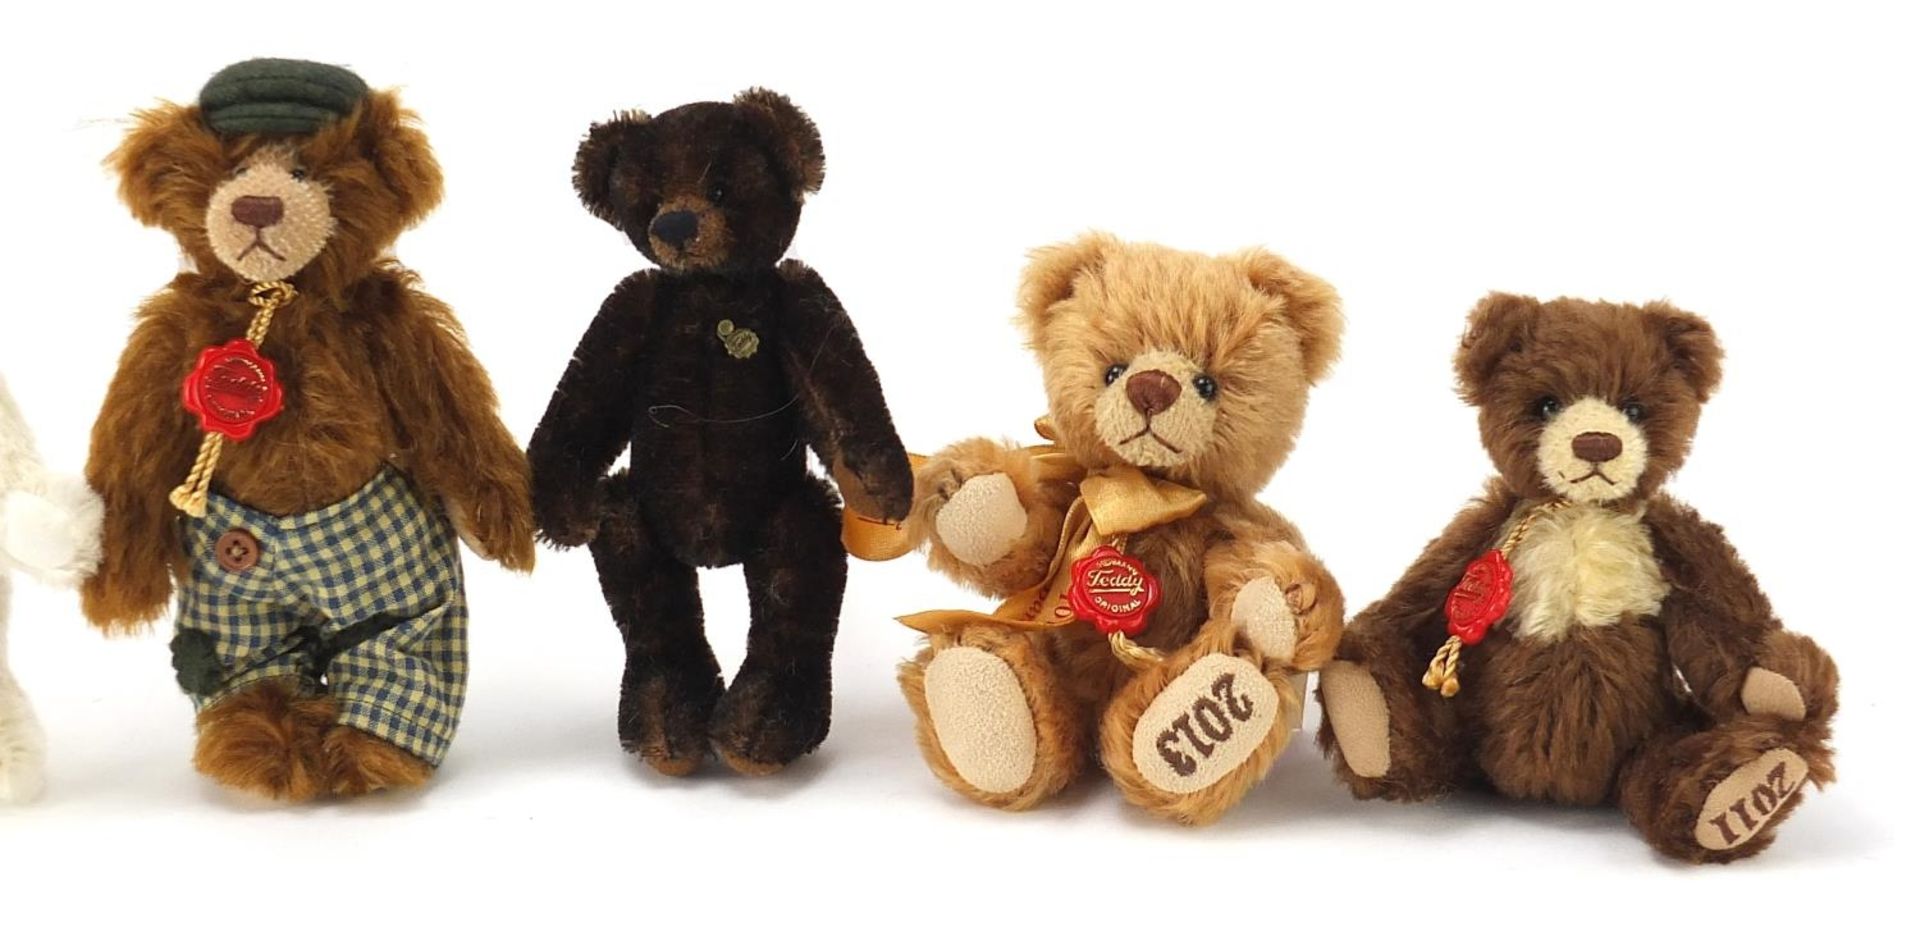 Eight Hermann miniature articulated teddy bears, 2005, 2006, 2007, 2008, 2009, 2011, 2013 and - Image 3 of 4